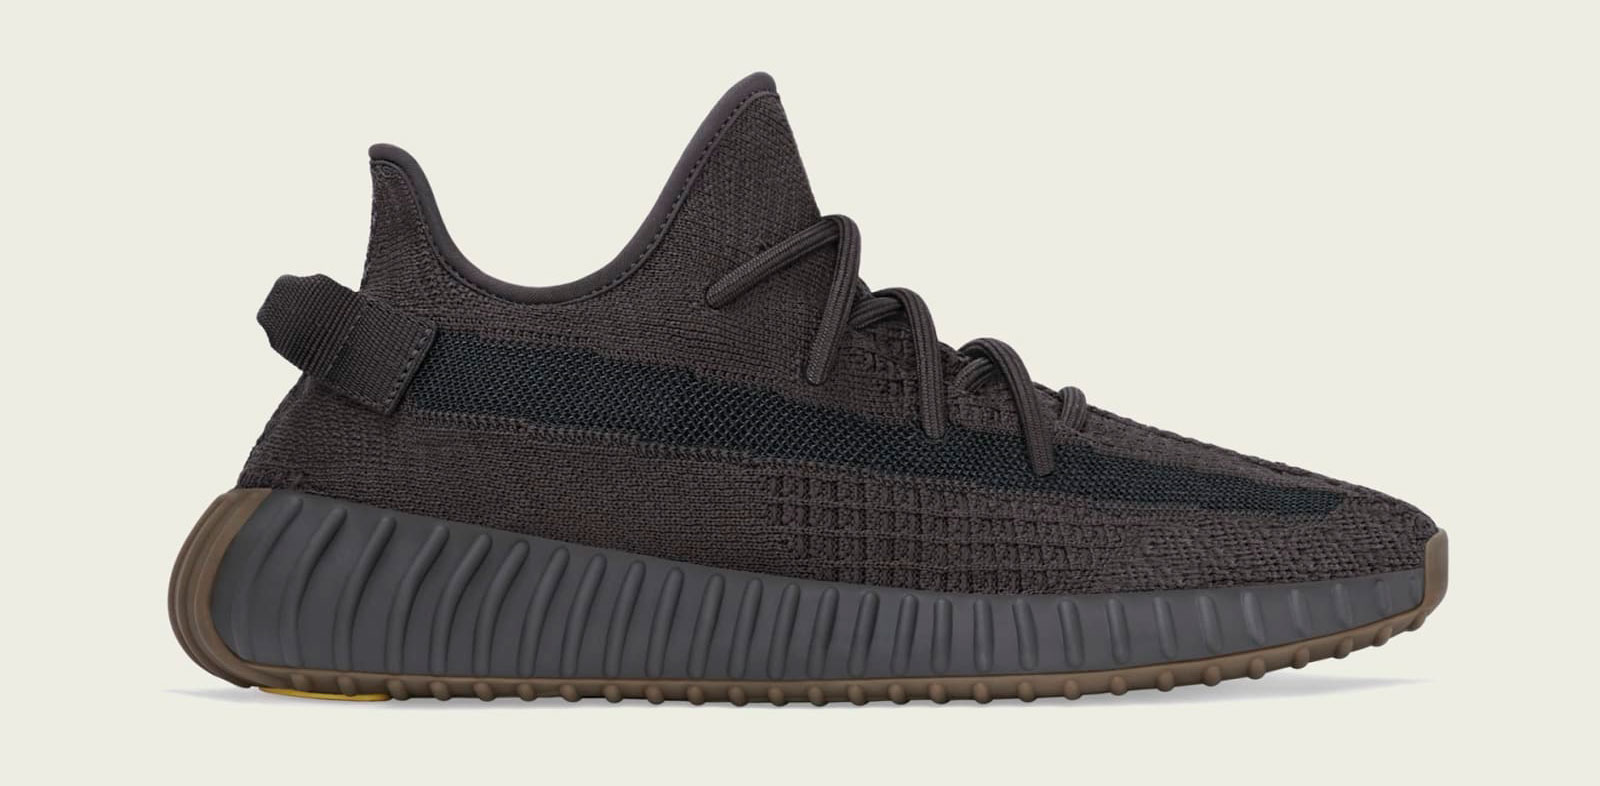 yeezy-boost-350-v2-cinder-release-date-price-3